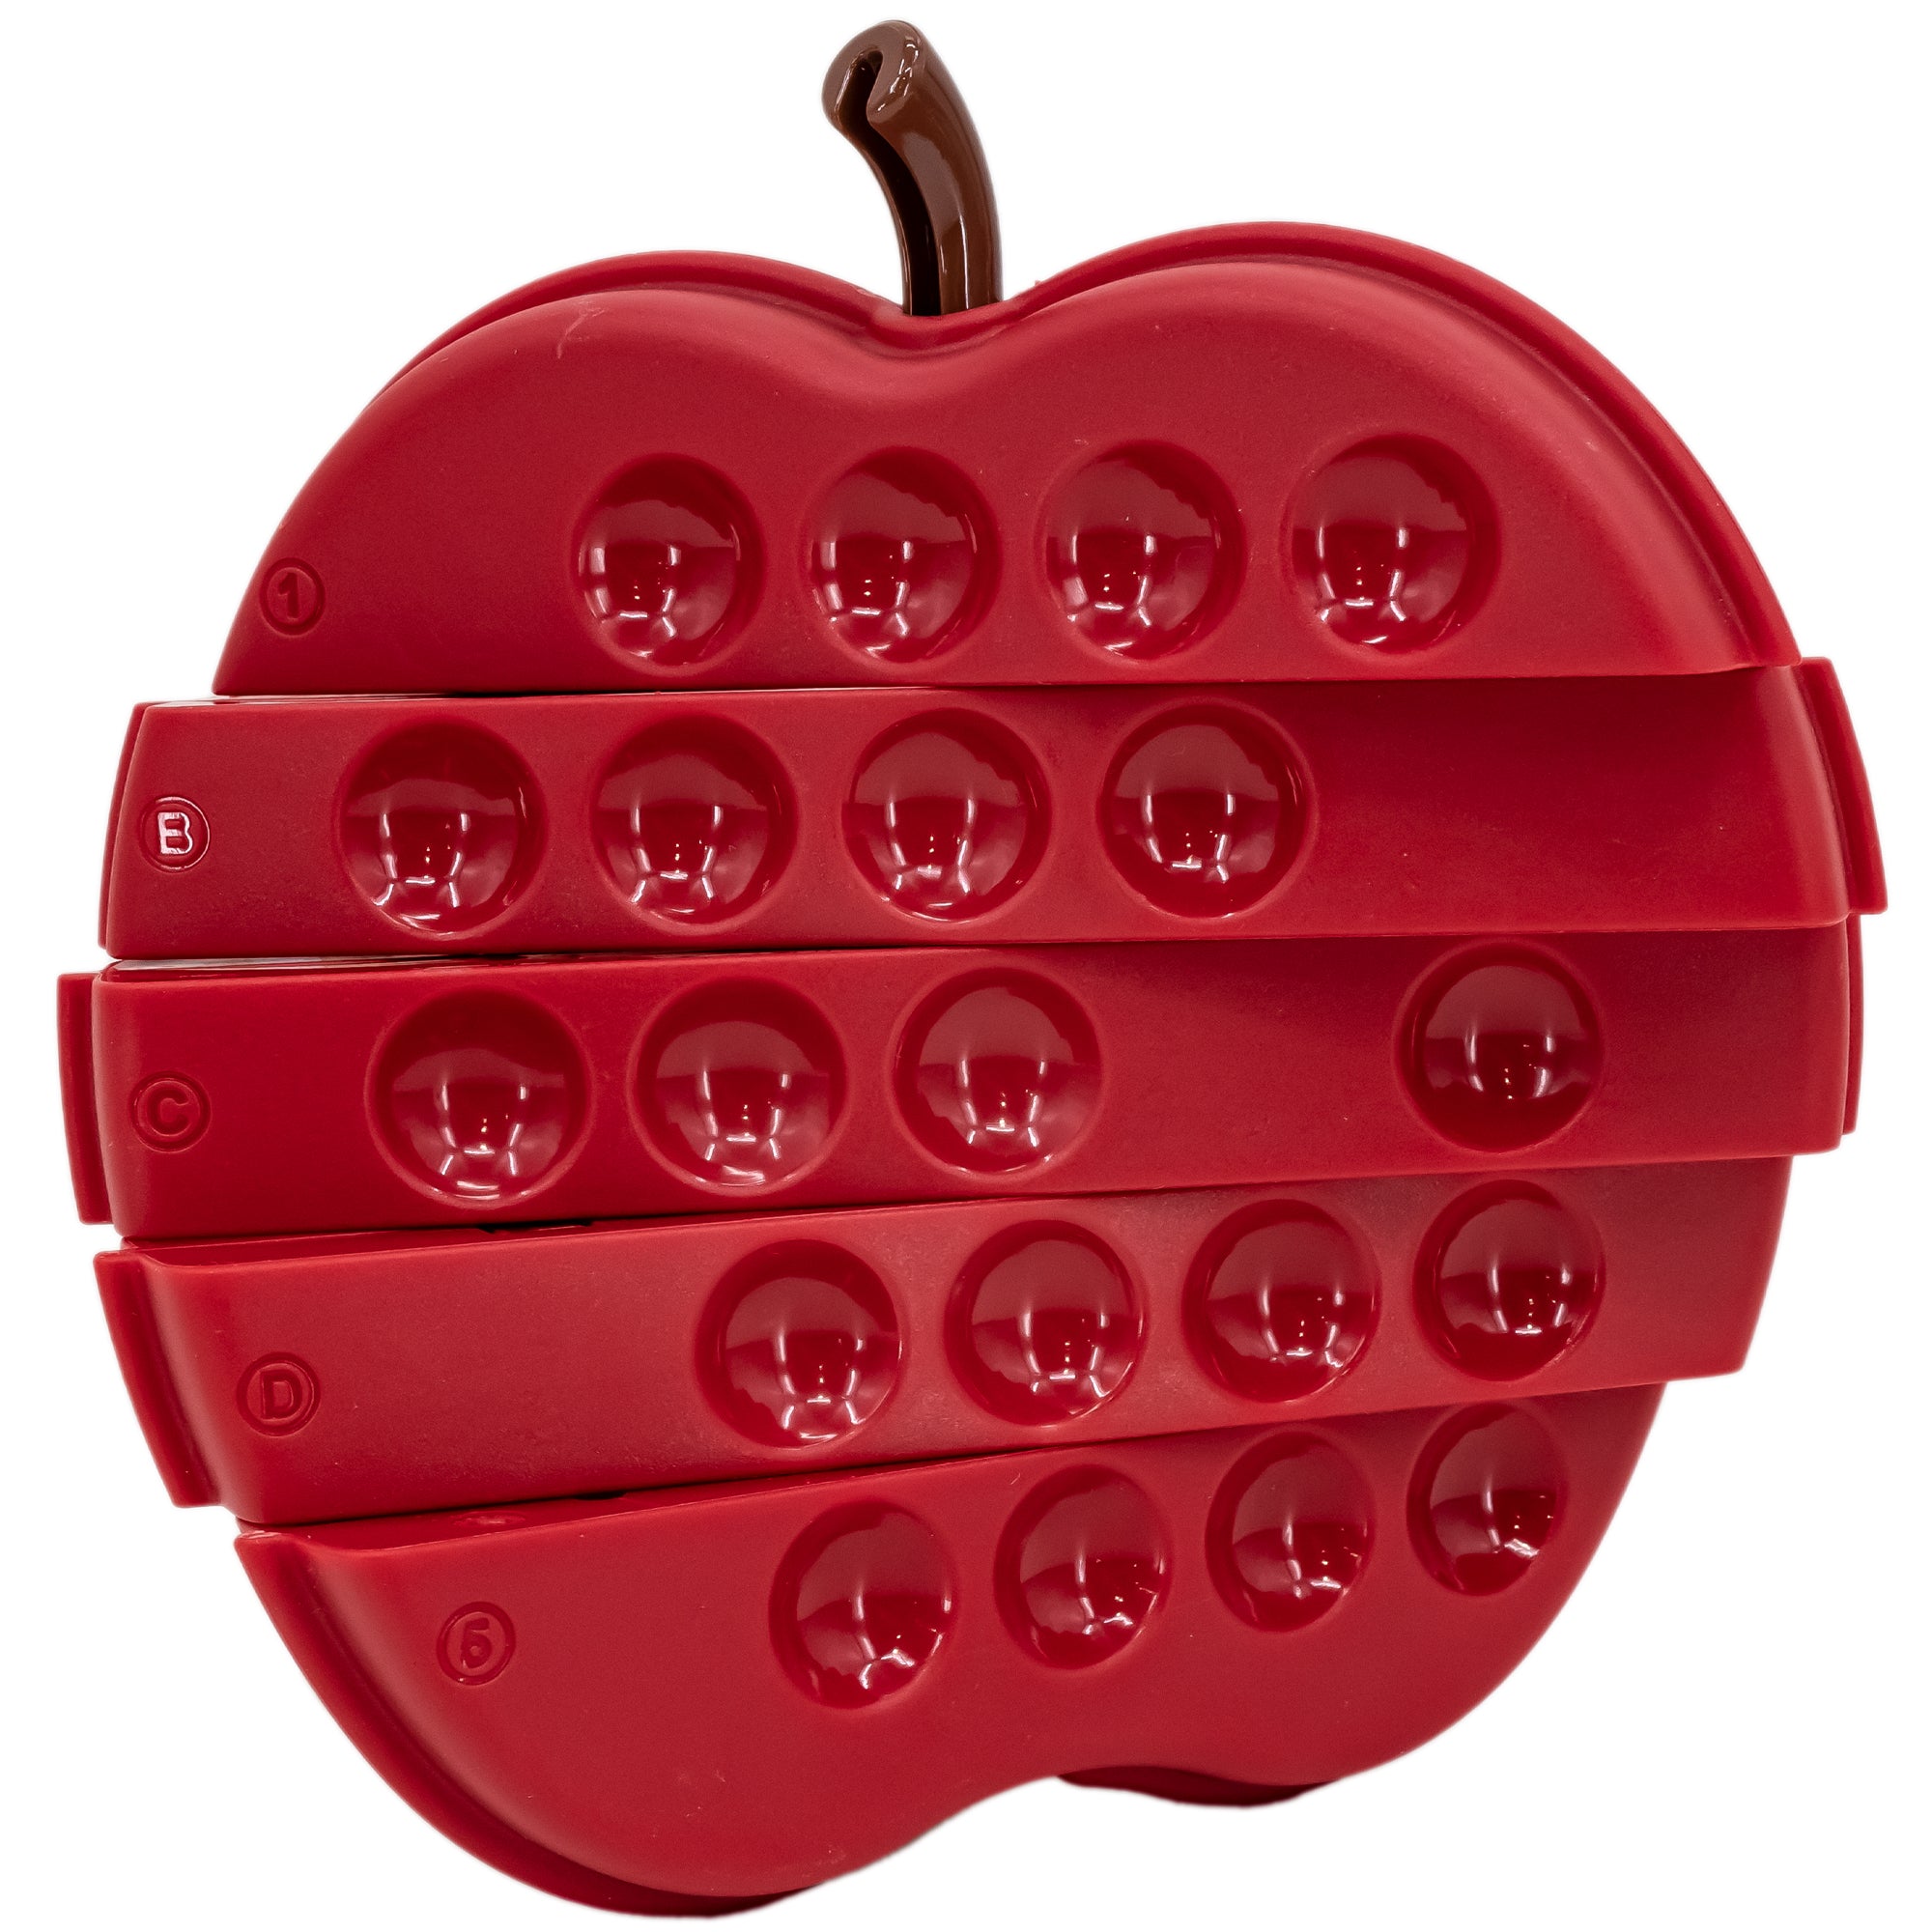 The Apple Twist Smart Game board. It is a red apple with a brown stem with lines horizontally through it. Some of the pieces on the board are partially twisted. The board has rounded dents to allow placement for the caterpillar pieces that come with the game.